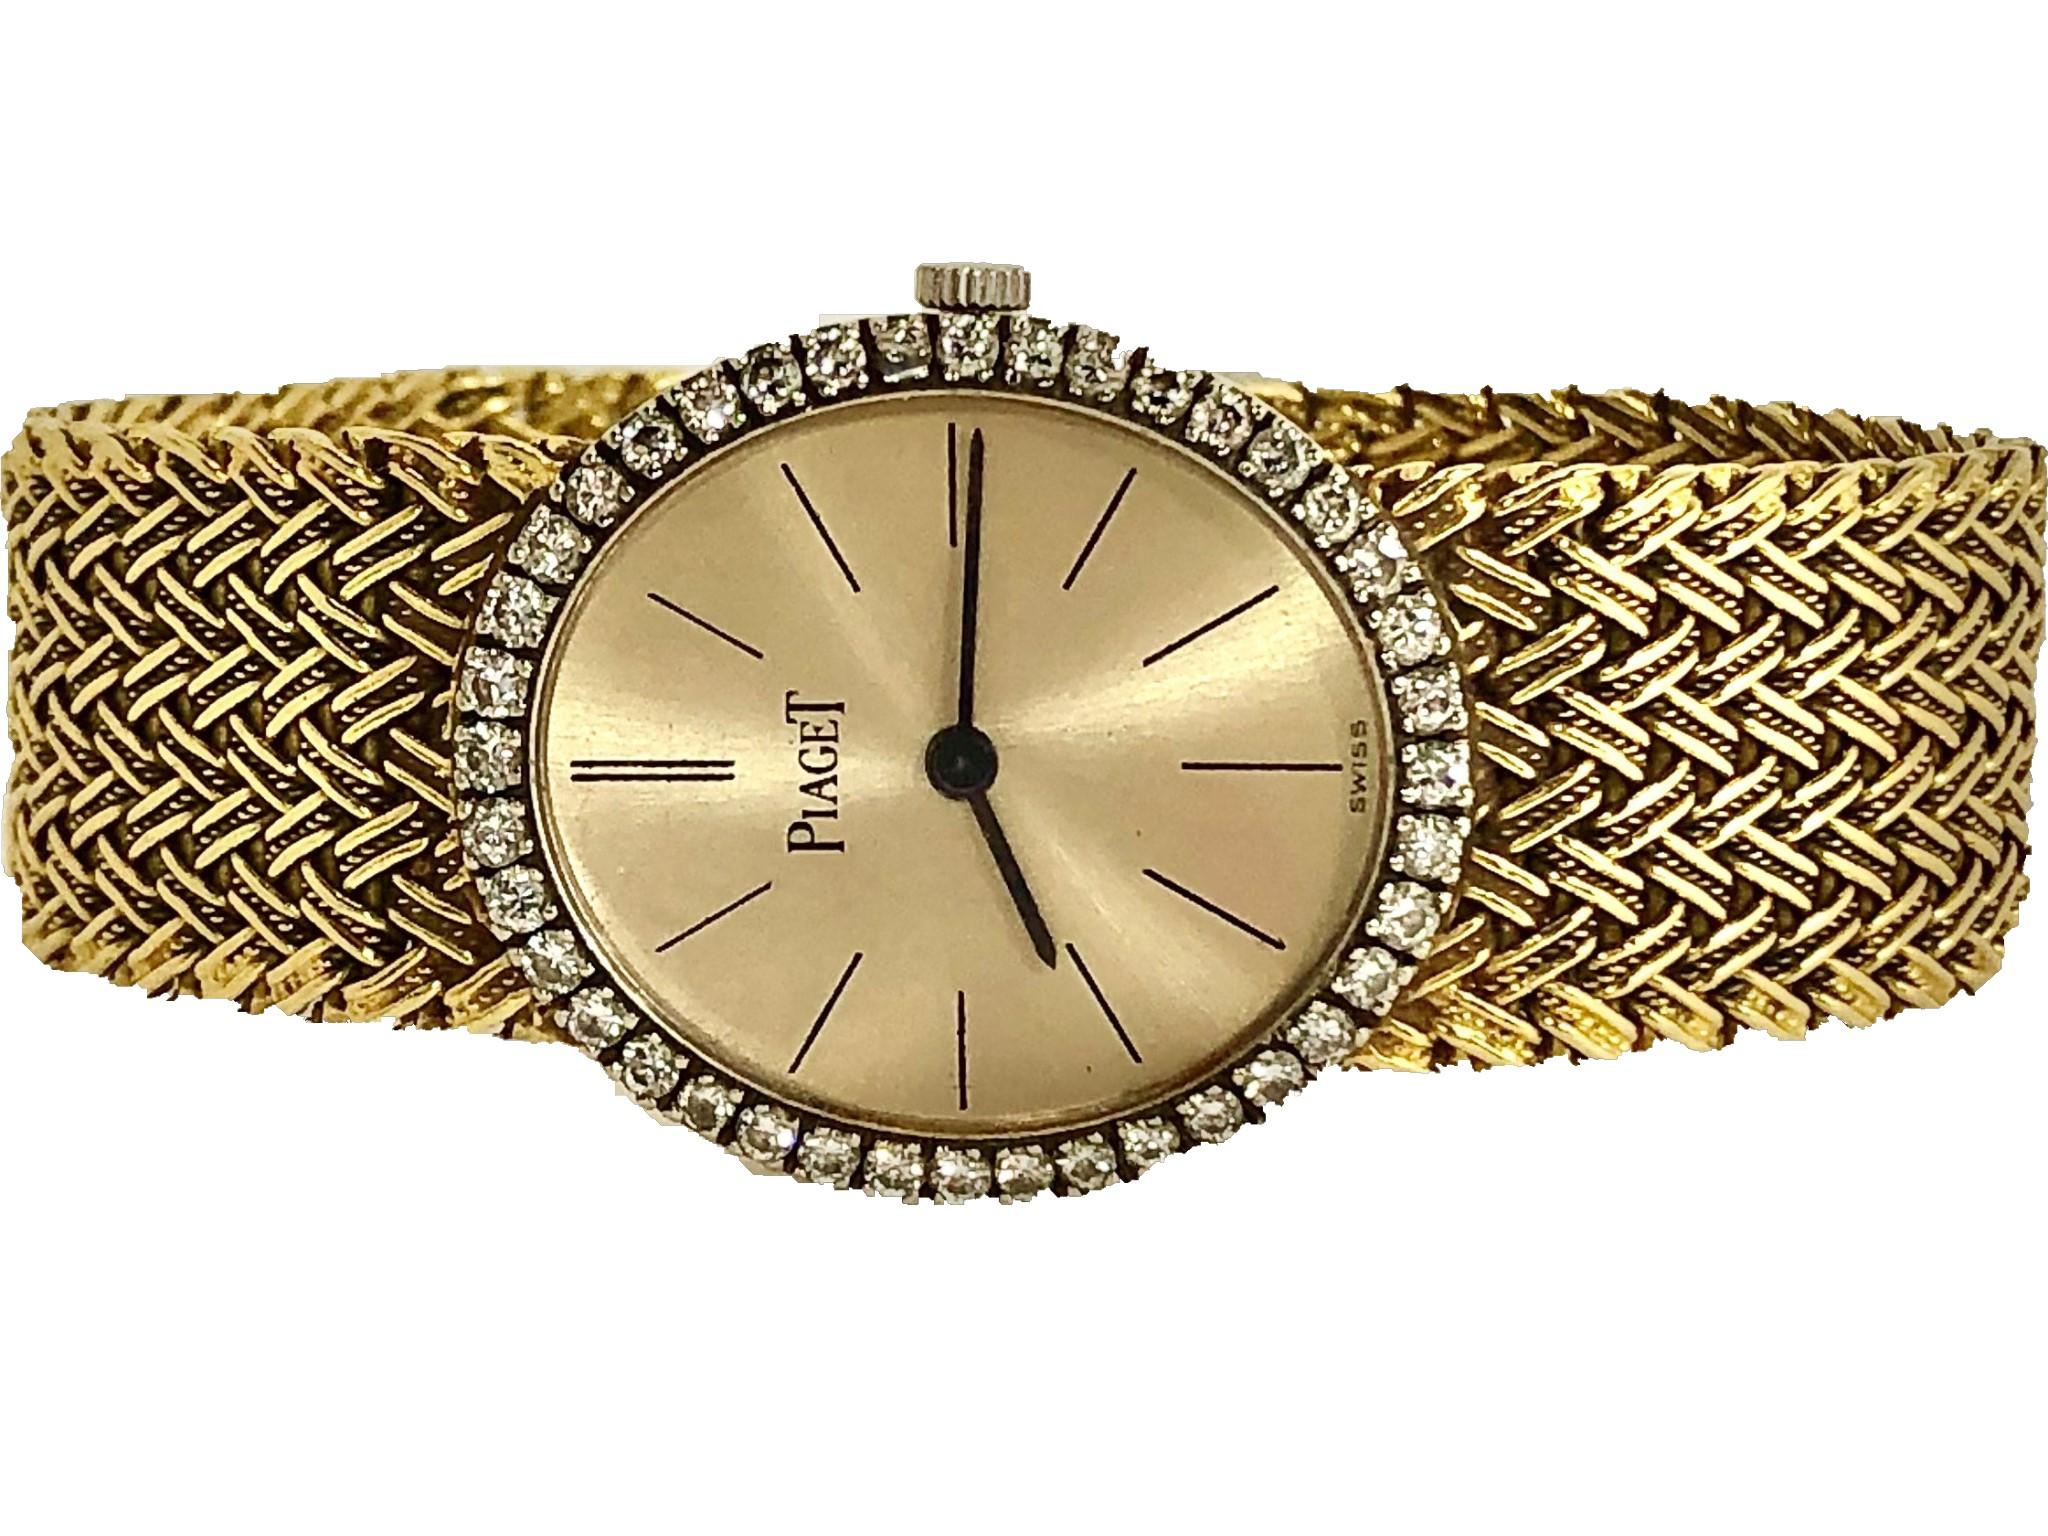 This lovely, ultra thin, 18K Yellow Gold Piaget ladies mid 20th century cocktail 
watch has a vertical oval champagne colored dial with black stick markers at
every position. The bezel surrounding the dial is set with 40 brilliant cut